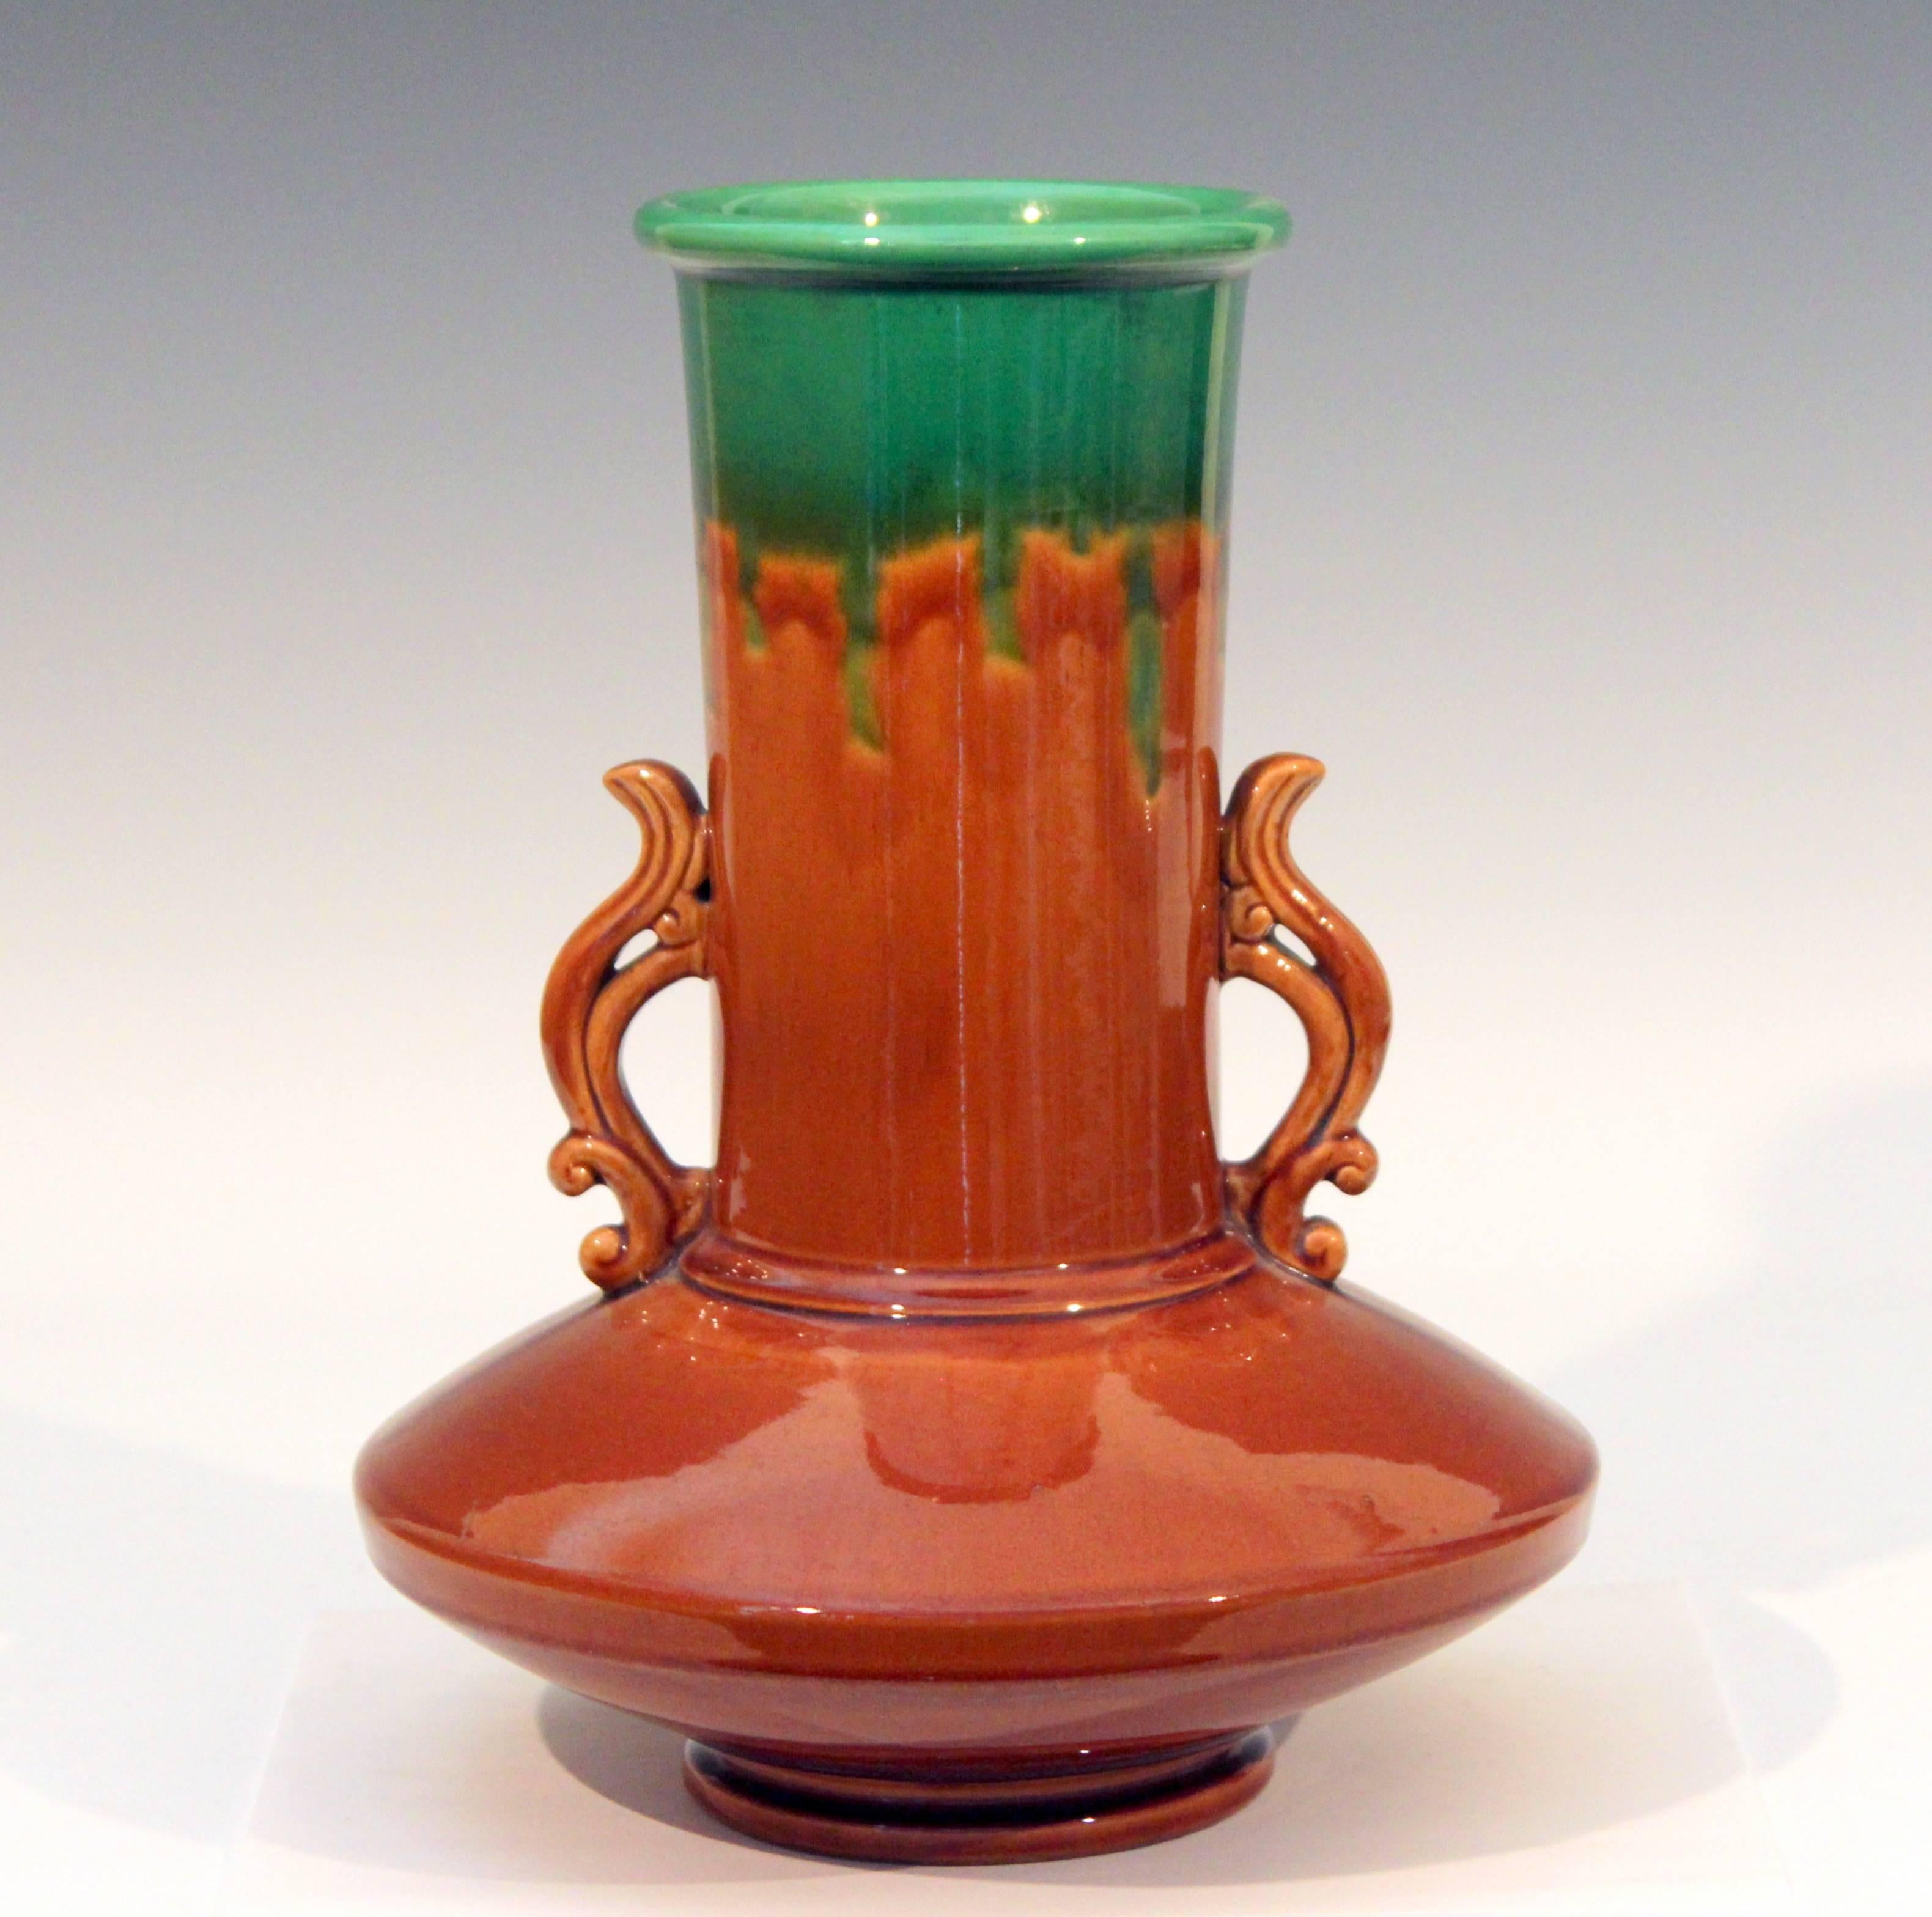 Awaji vase in Art Deco form with compressed saucer base and little flame like handles along the cylindrical neck in even, green over brown drip glaze, circa 1920s. Nice details with separately articulated foot, body, and neck. The little flaming